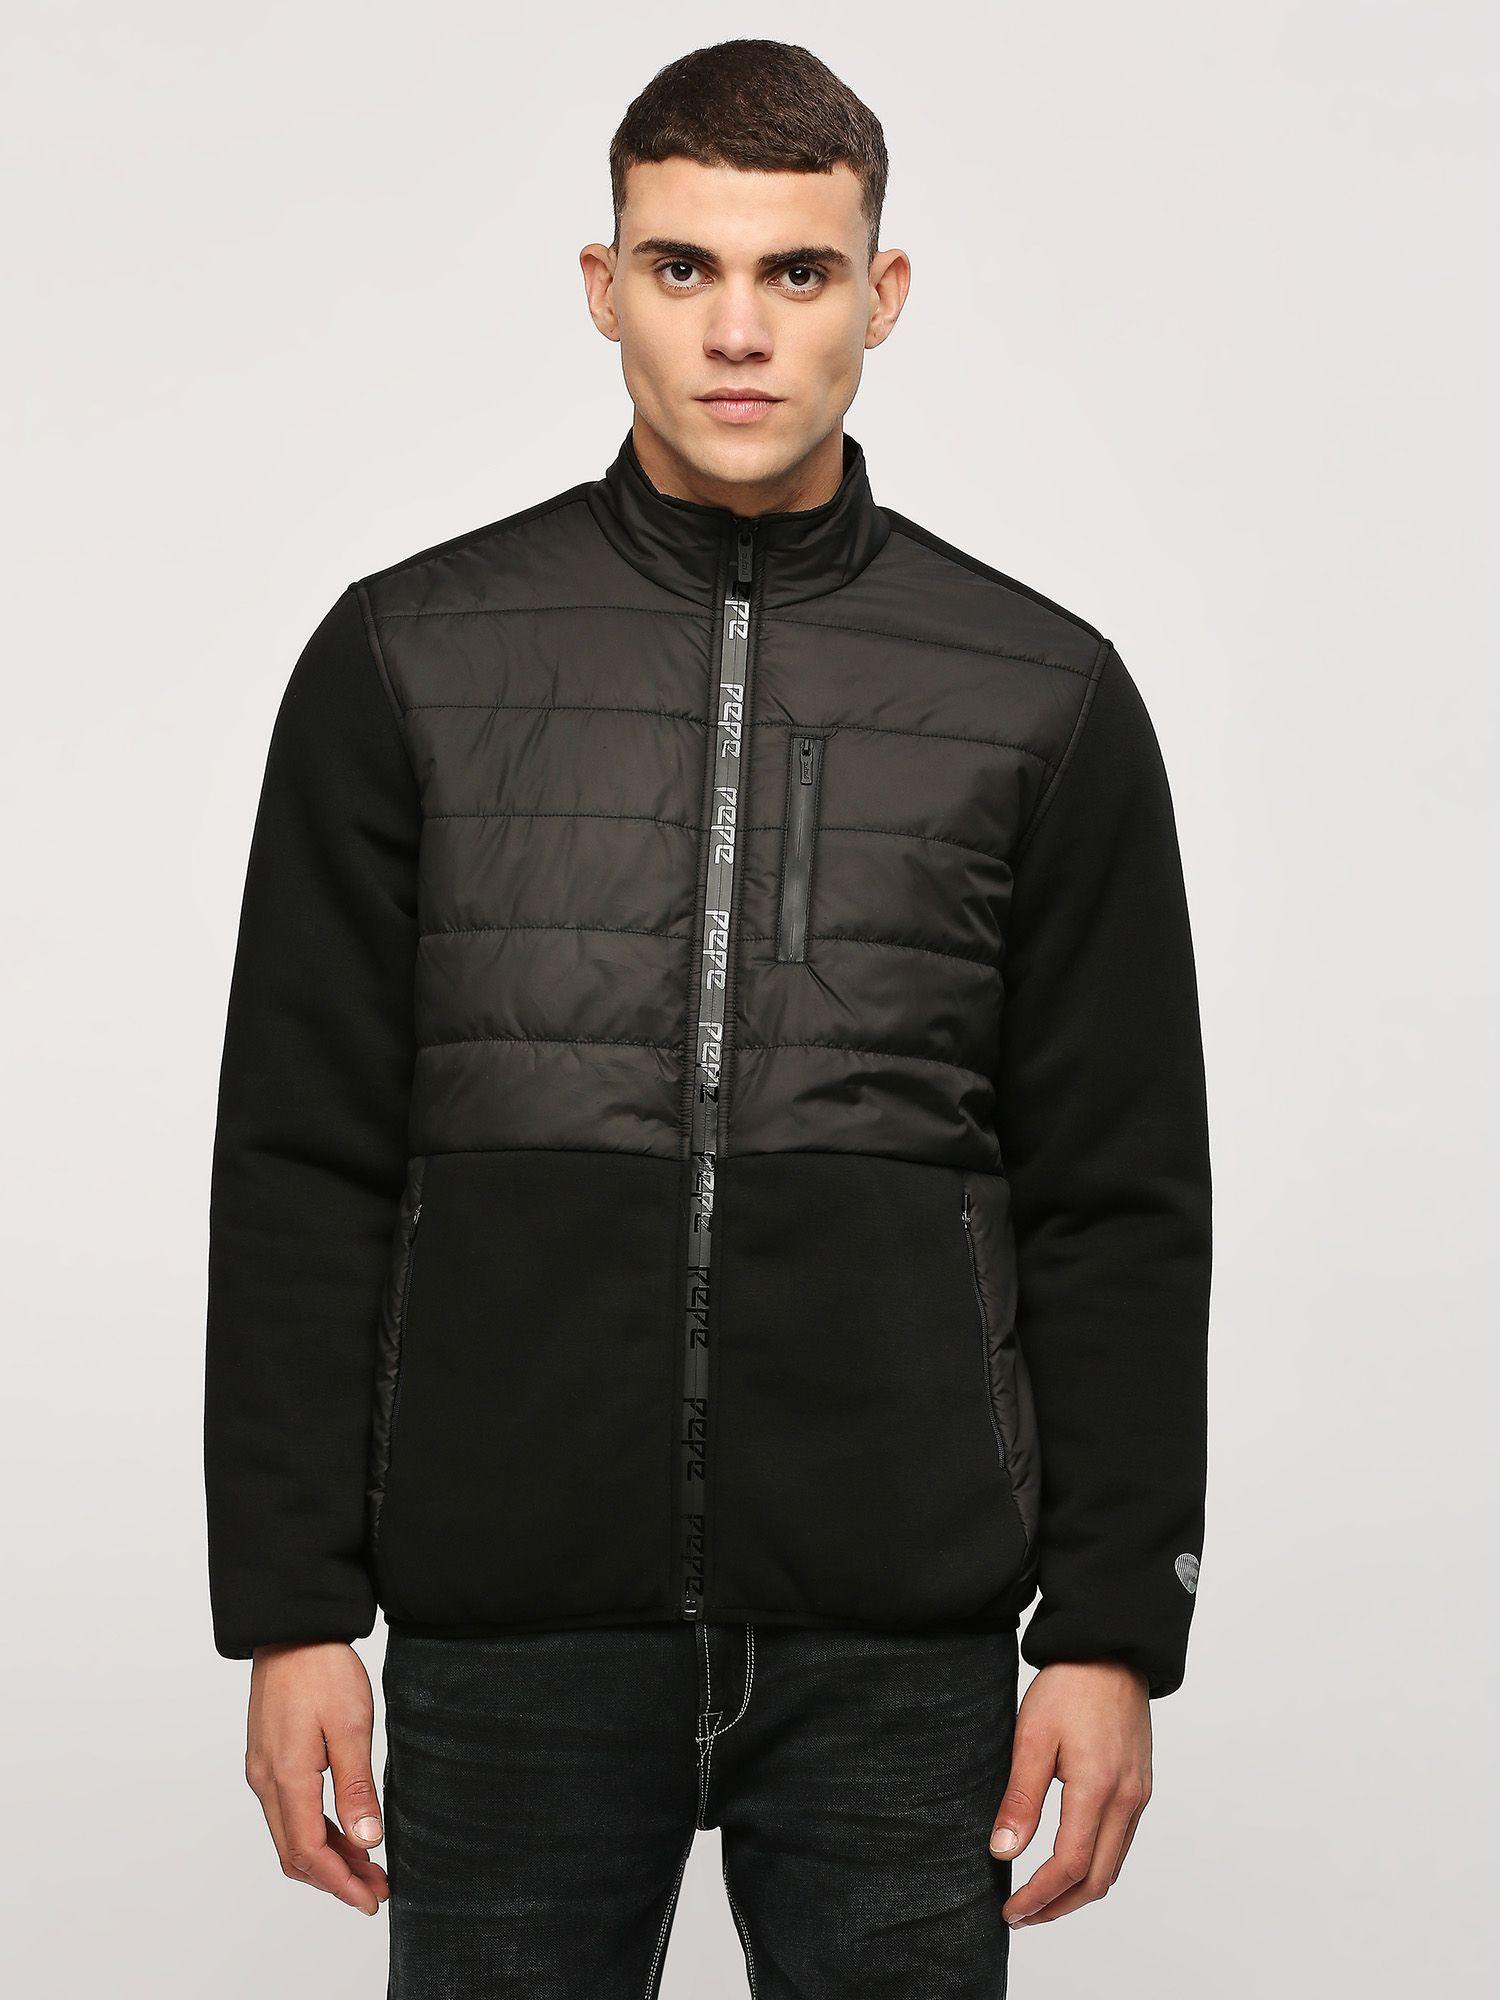 black-cut-sew-quilted-hybrid-jacket